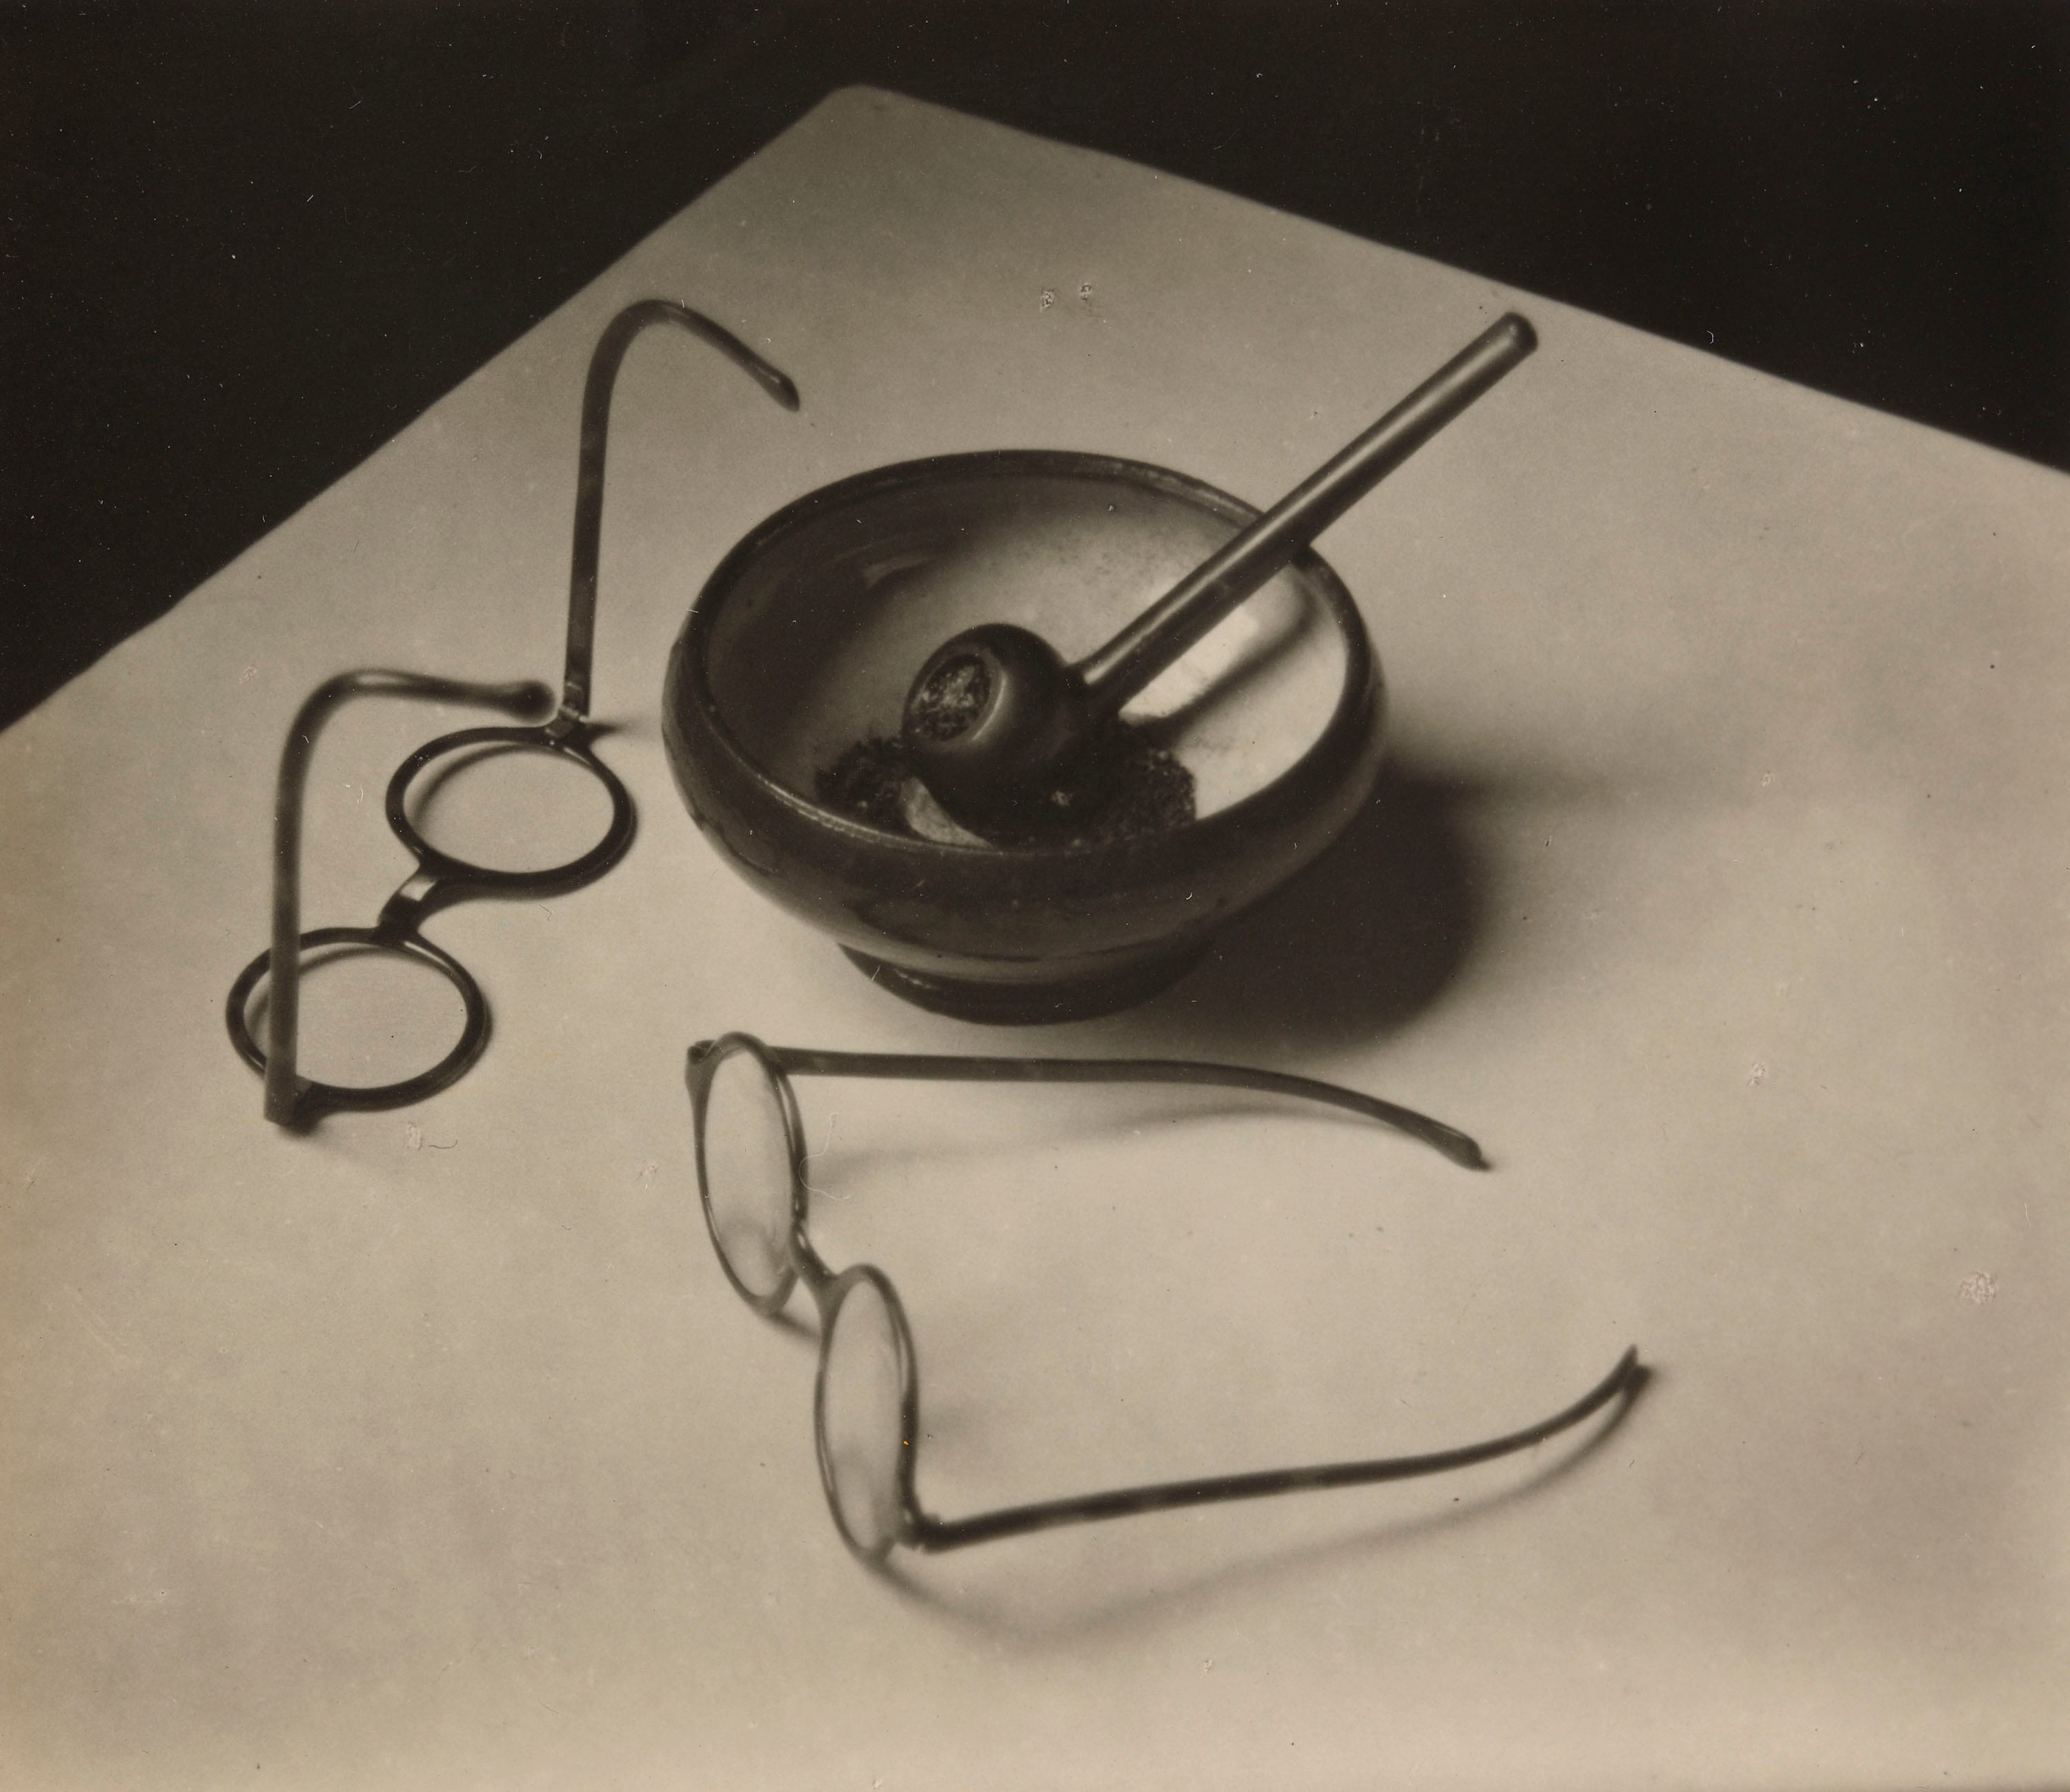 André Kertész: Mondrian's Glasses and Pipe, 1926. Stampa alla gelatina ai sali d’argento, 7.9 x 9.3 cm. The Museum of Modern Art, New York Thomas Walther Collection. Grace M. Mayer Fund © Estate of André Kertész Digital Image © 2021 The Museum of Modern Art, New York/Scala, Florence